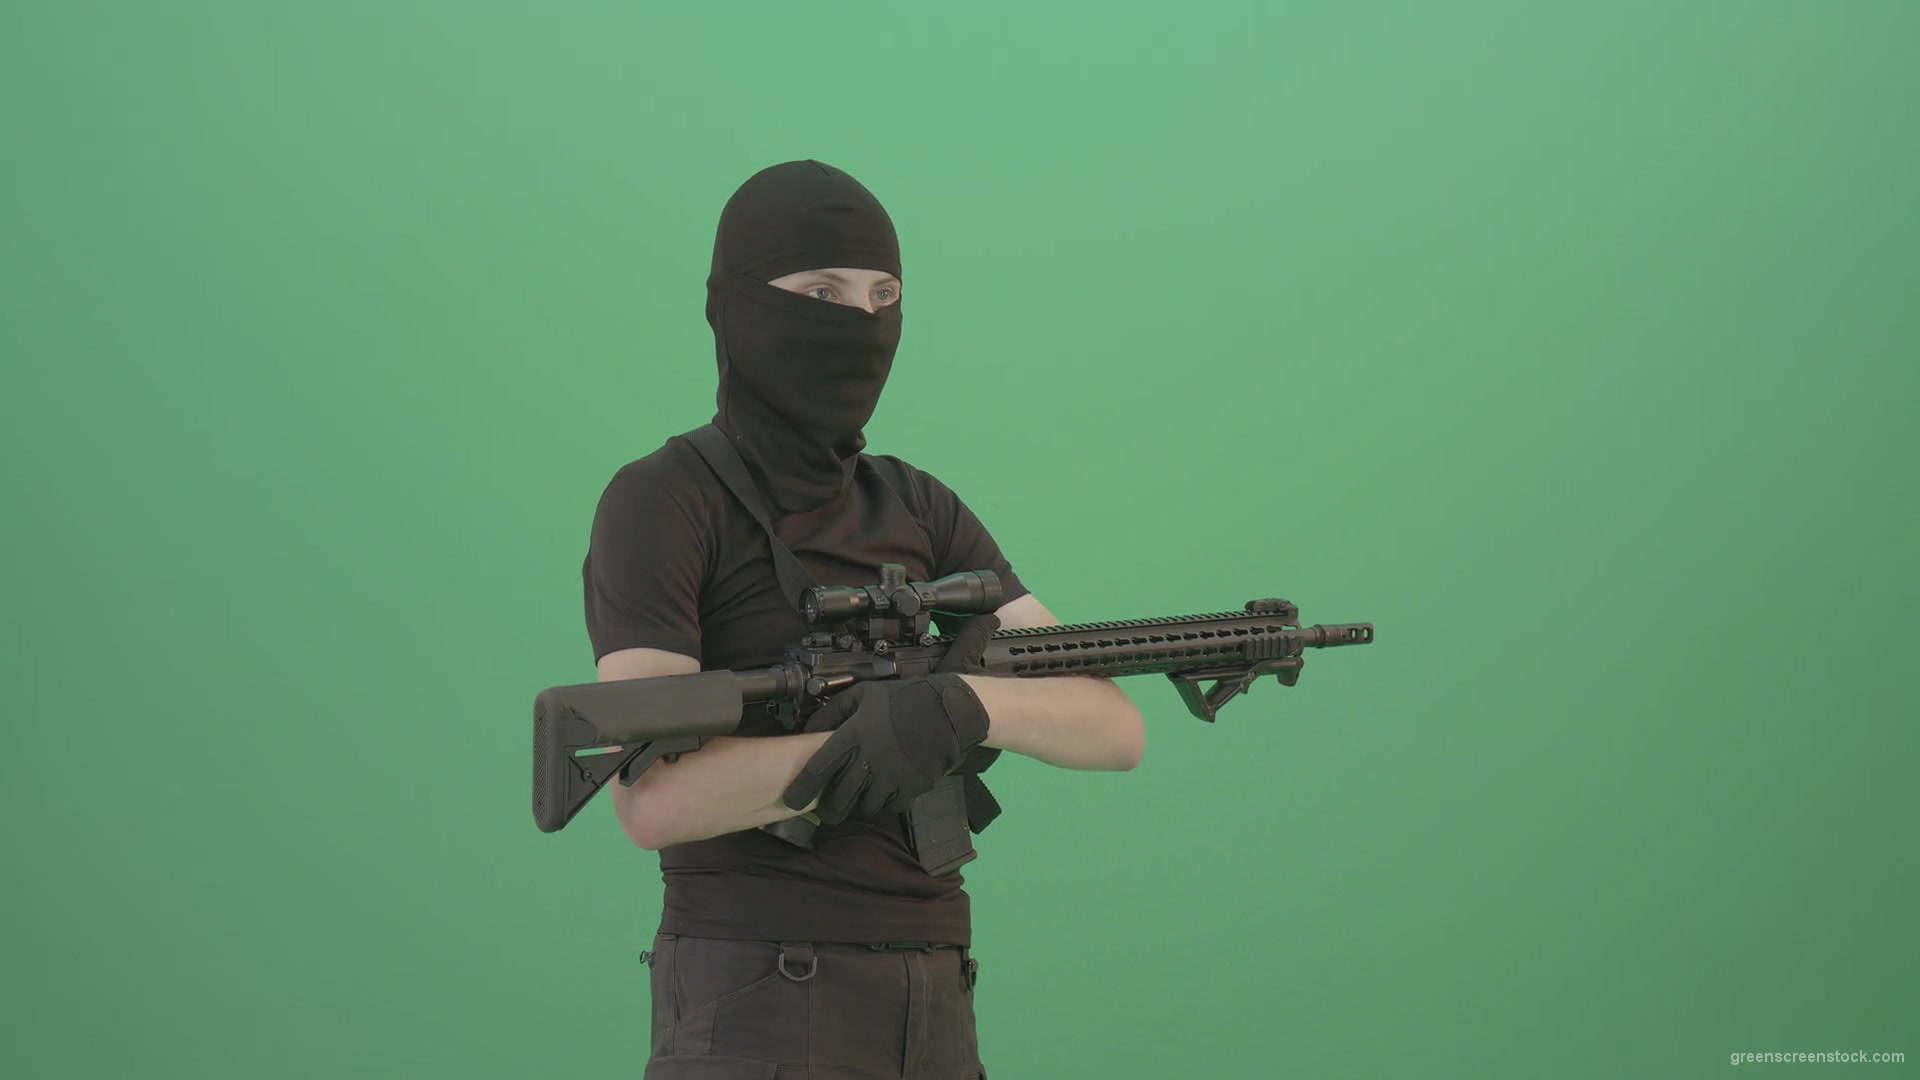 Soldier-man-with-weapon-looking-enemies-isolated-on-green-screen-4K-Video-Footage-1920_005 Green Screen Stock